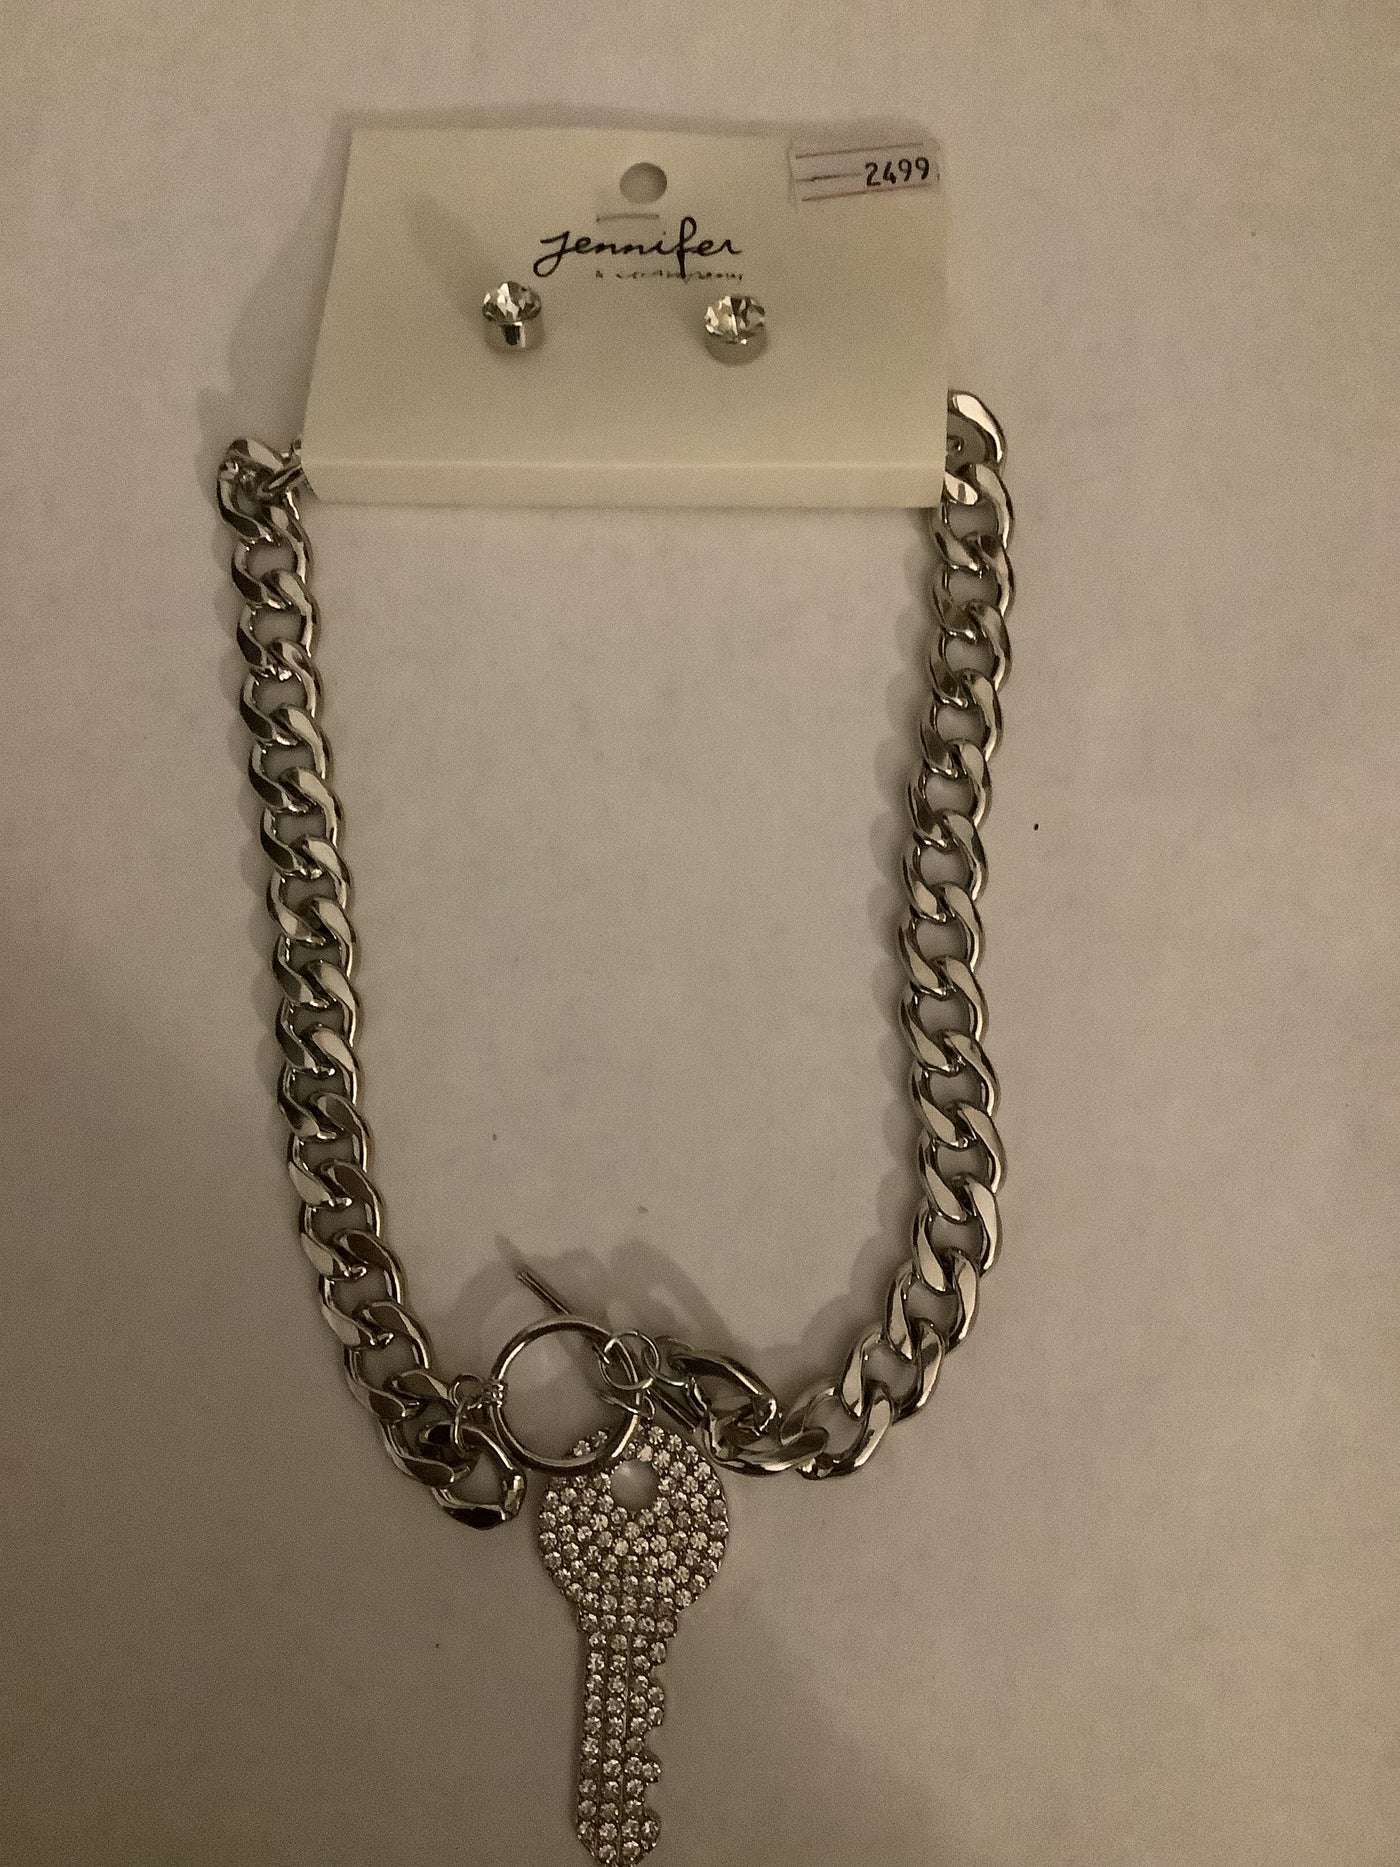 Silver Key Chain with earrings